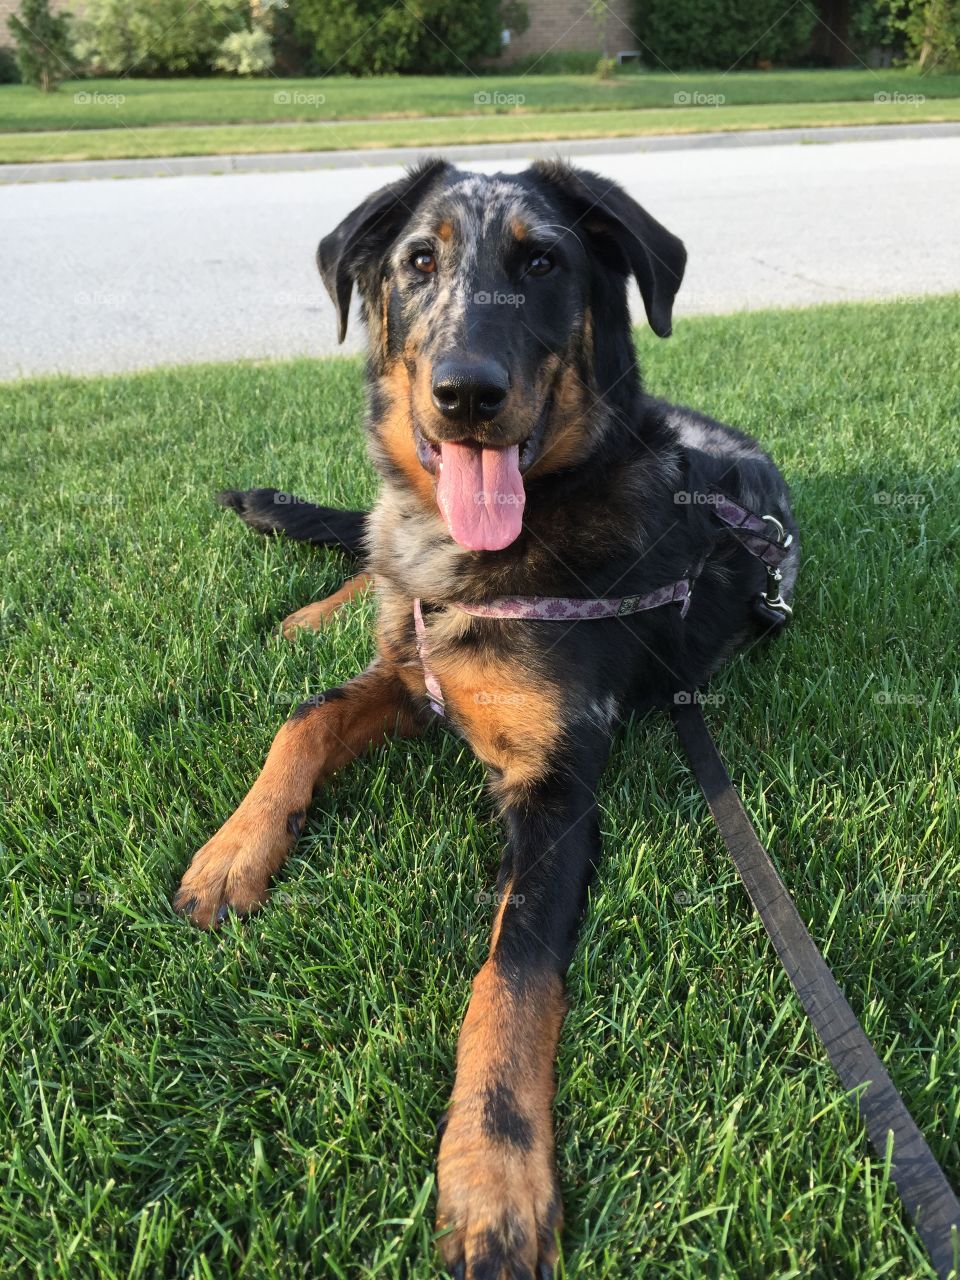 This is my dog, she is a harlequin coated beauceron. A very rare herding breed from France. Her markings are super unique and unlike all other dogs. 